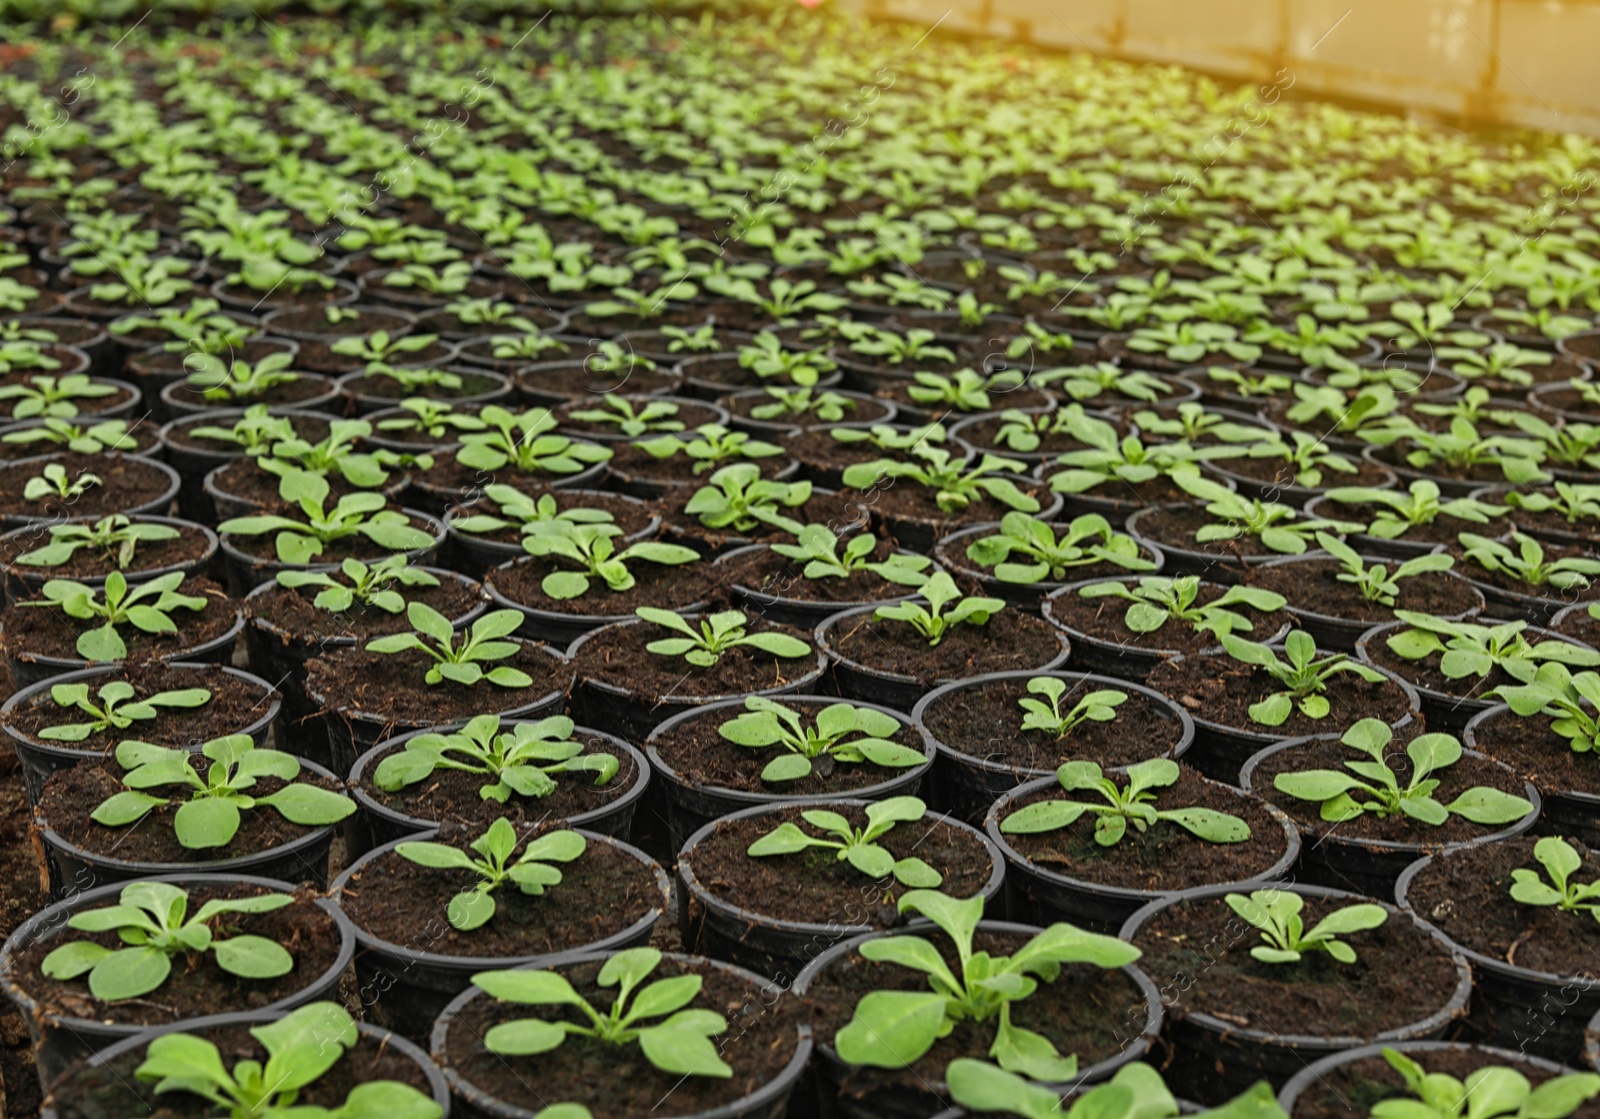 Photo of Many fresh green seedlings growing in pots with soil